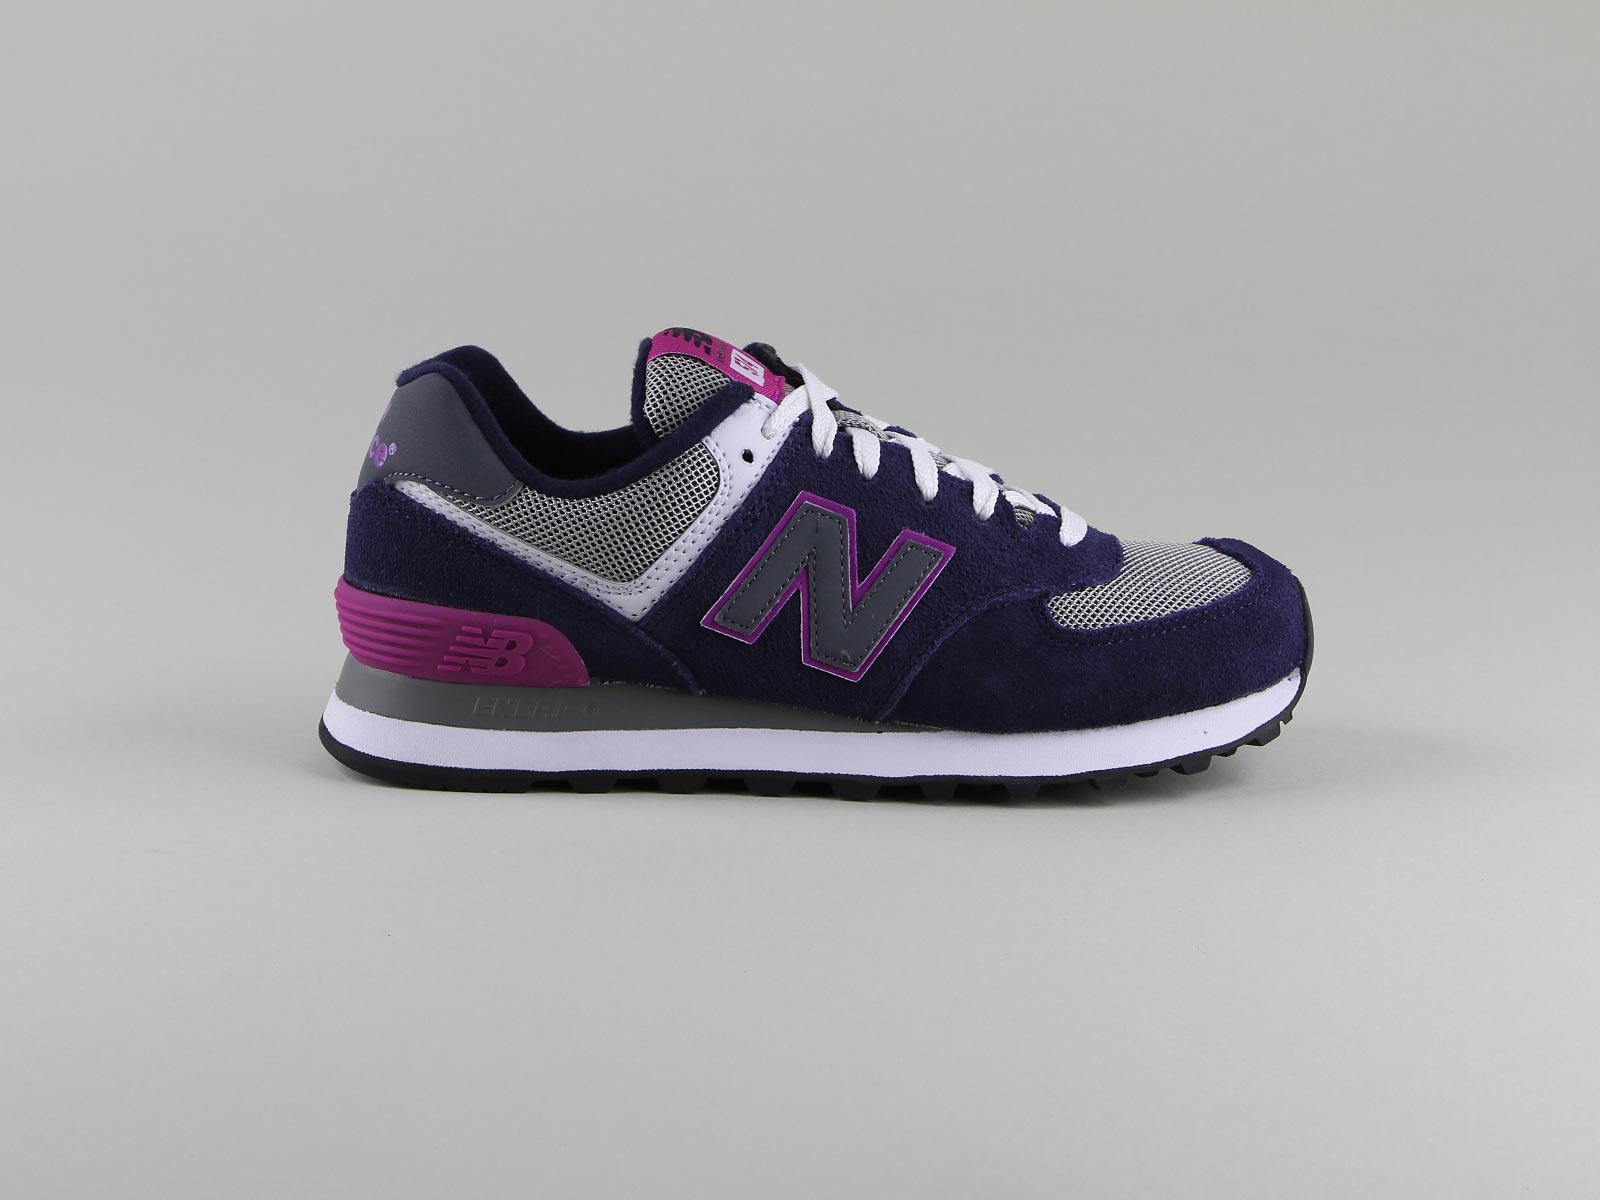 chaussure new balance femme rouge